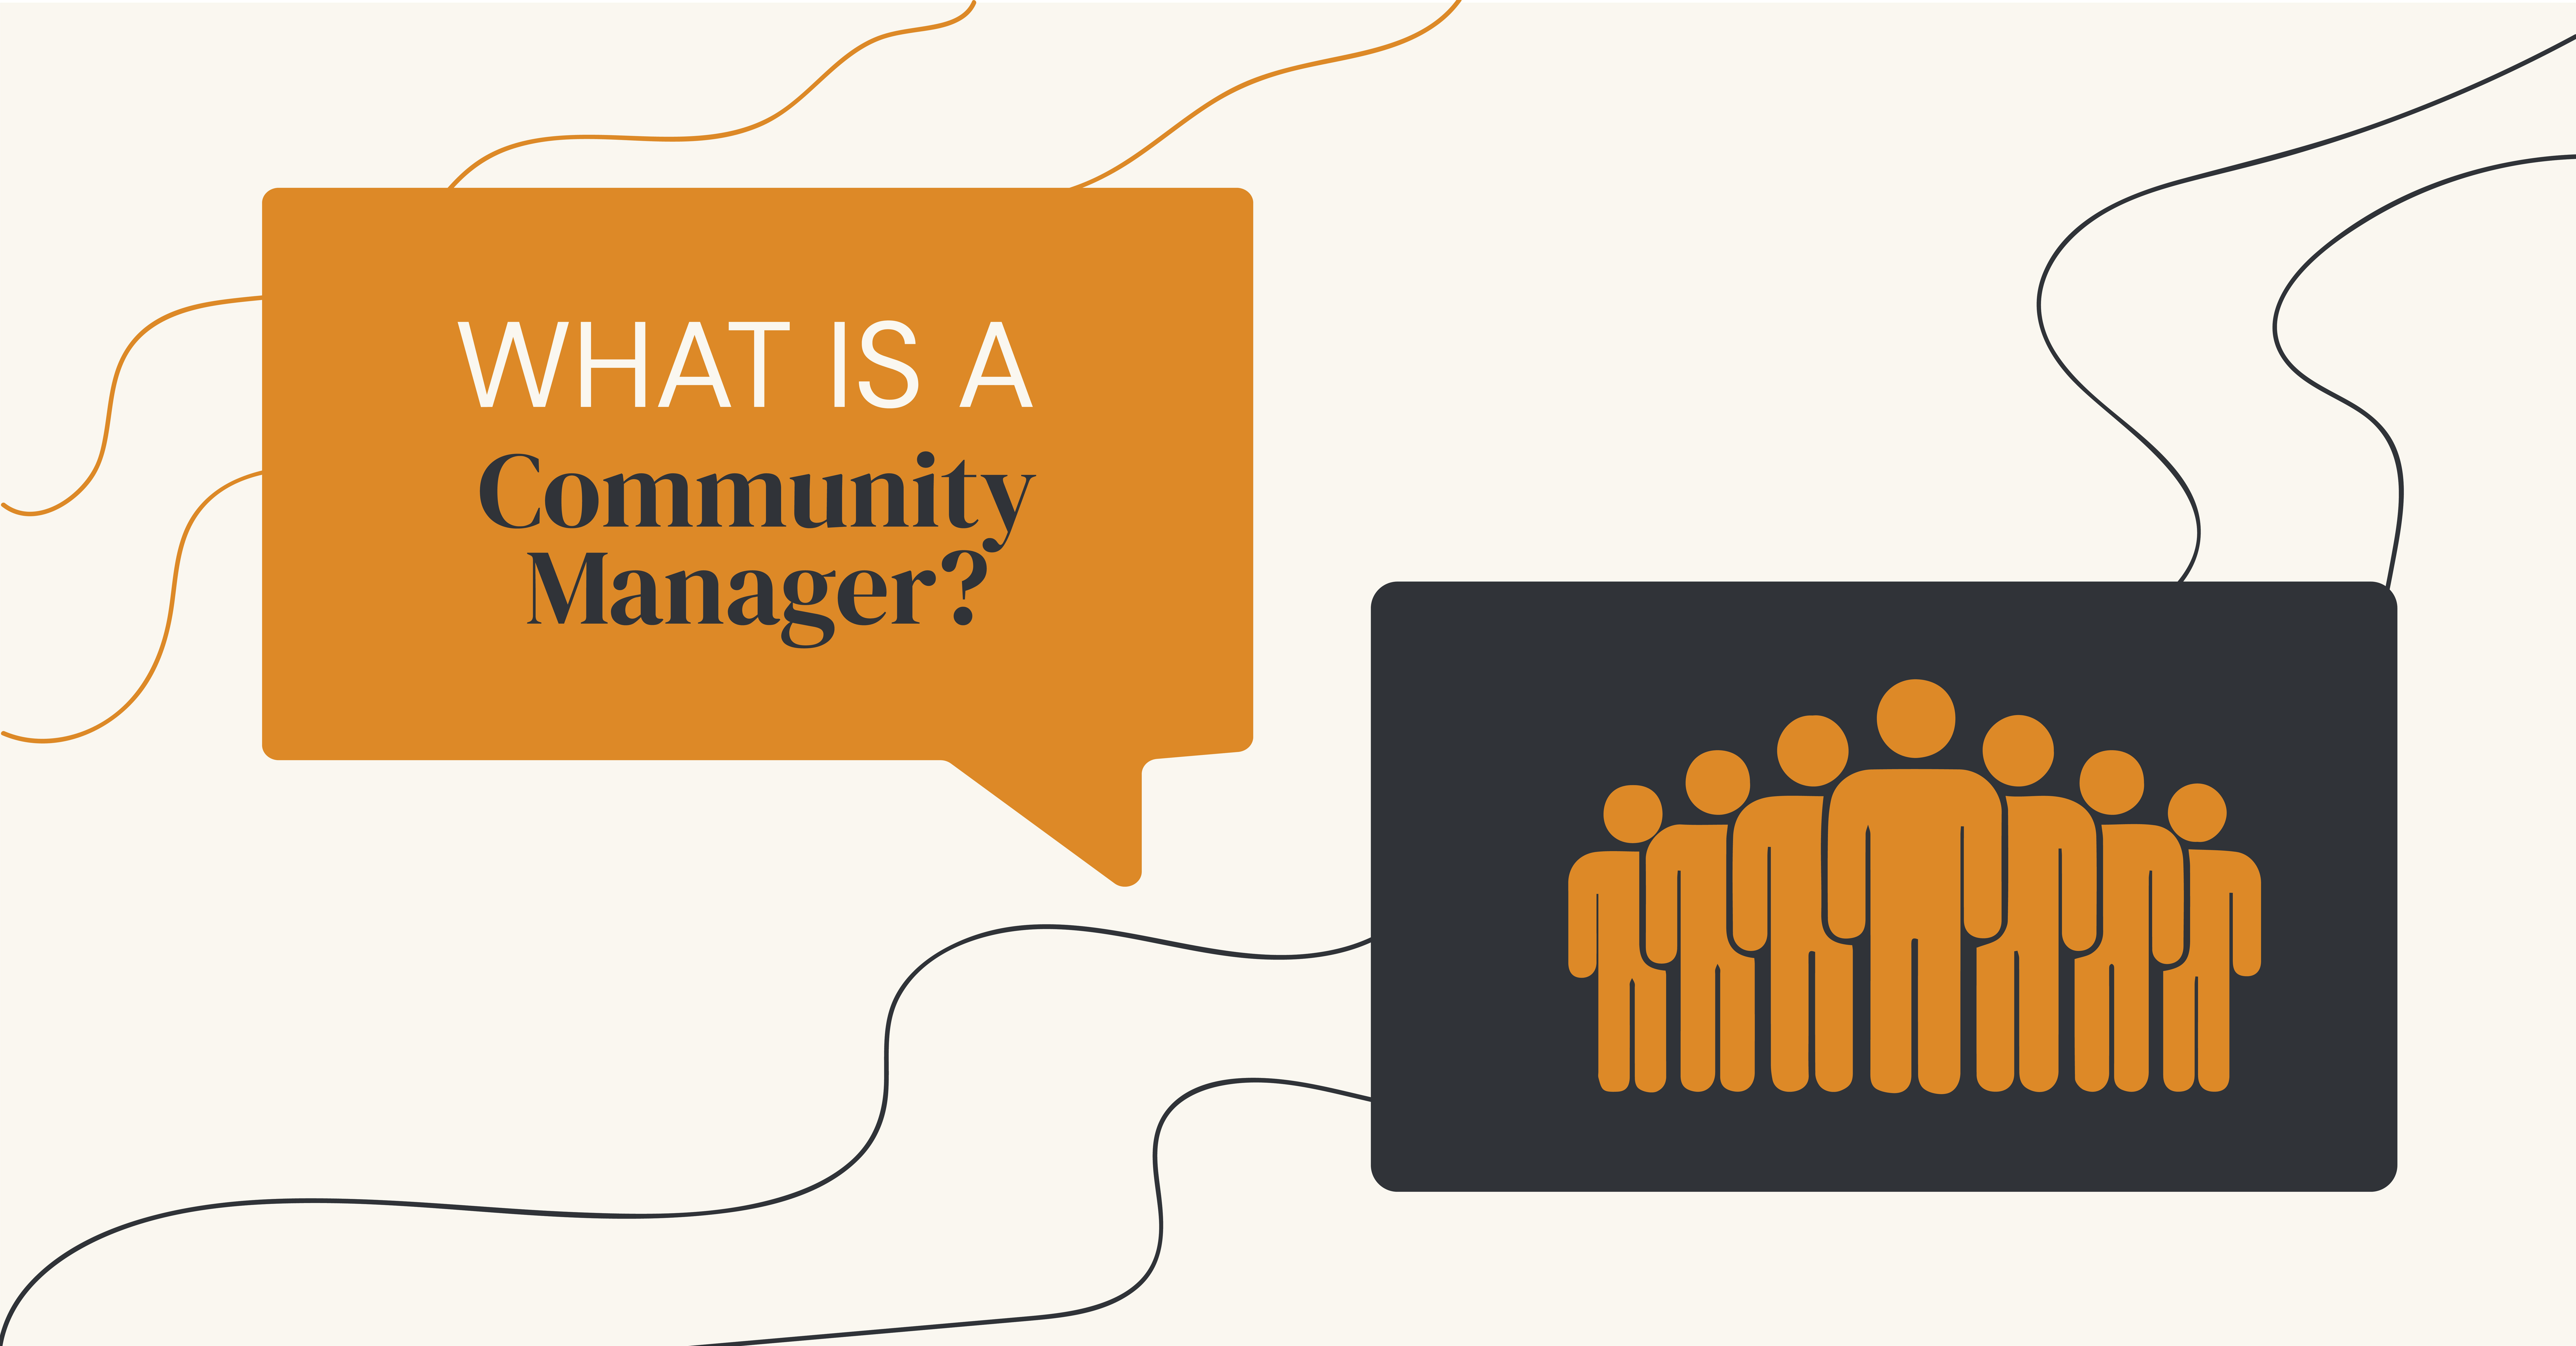 What is a community manager